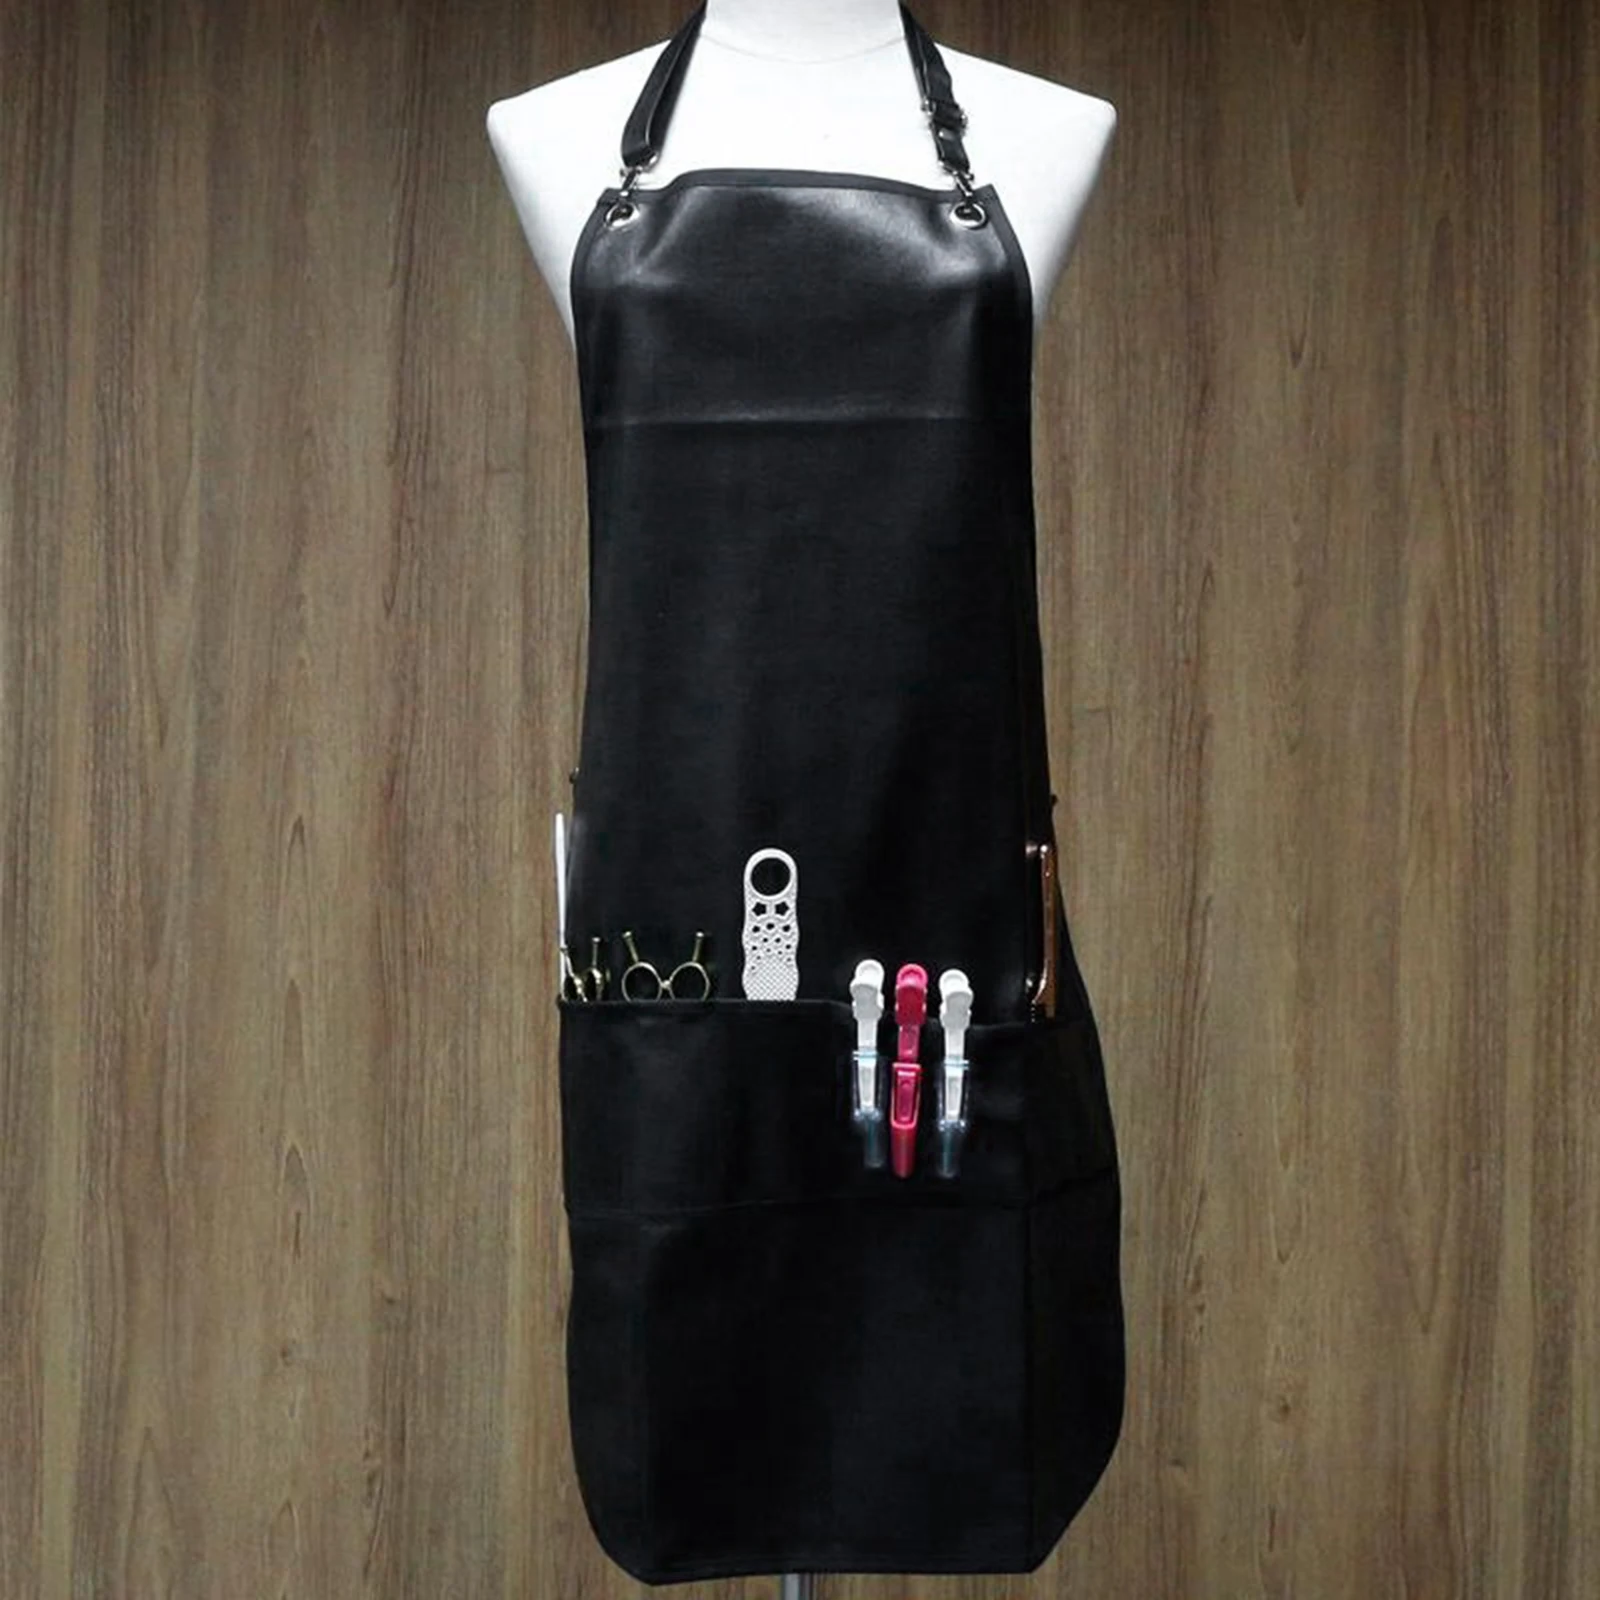 Salon Hairdressing Hair Cutting Apron Cape for Barber Hairstylist Waterproof